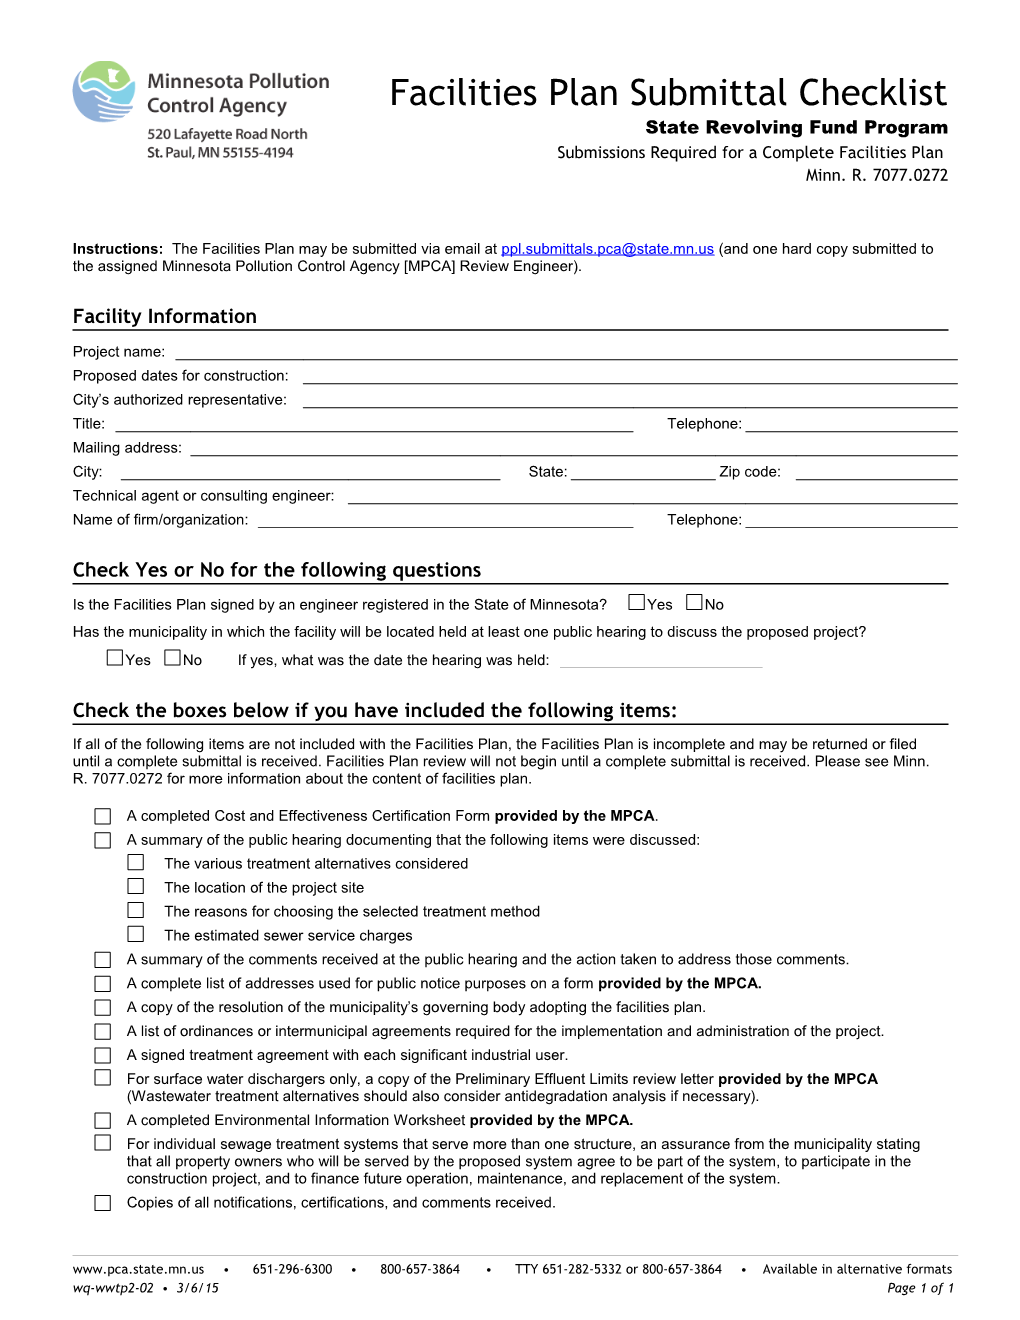 Facilities Plan Submittal Checklist - State Revolving Fund - Form